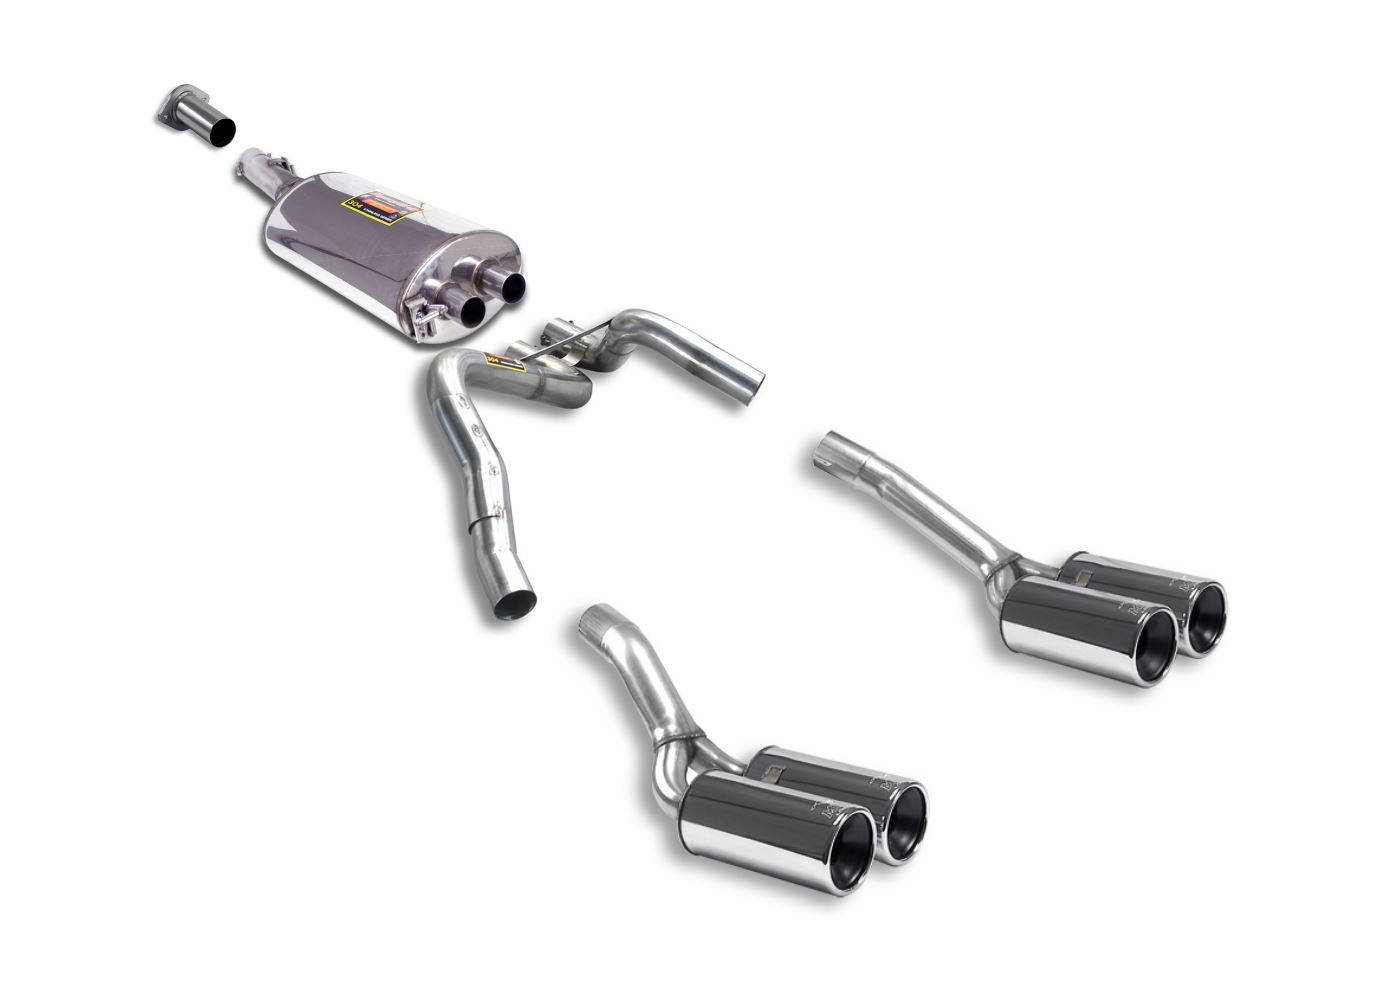 Hummer H2 Exhaust System Review